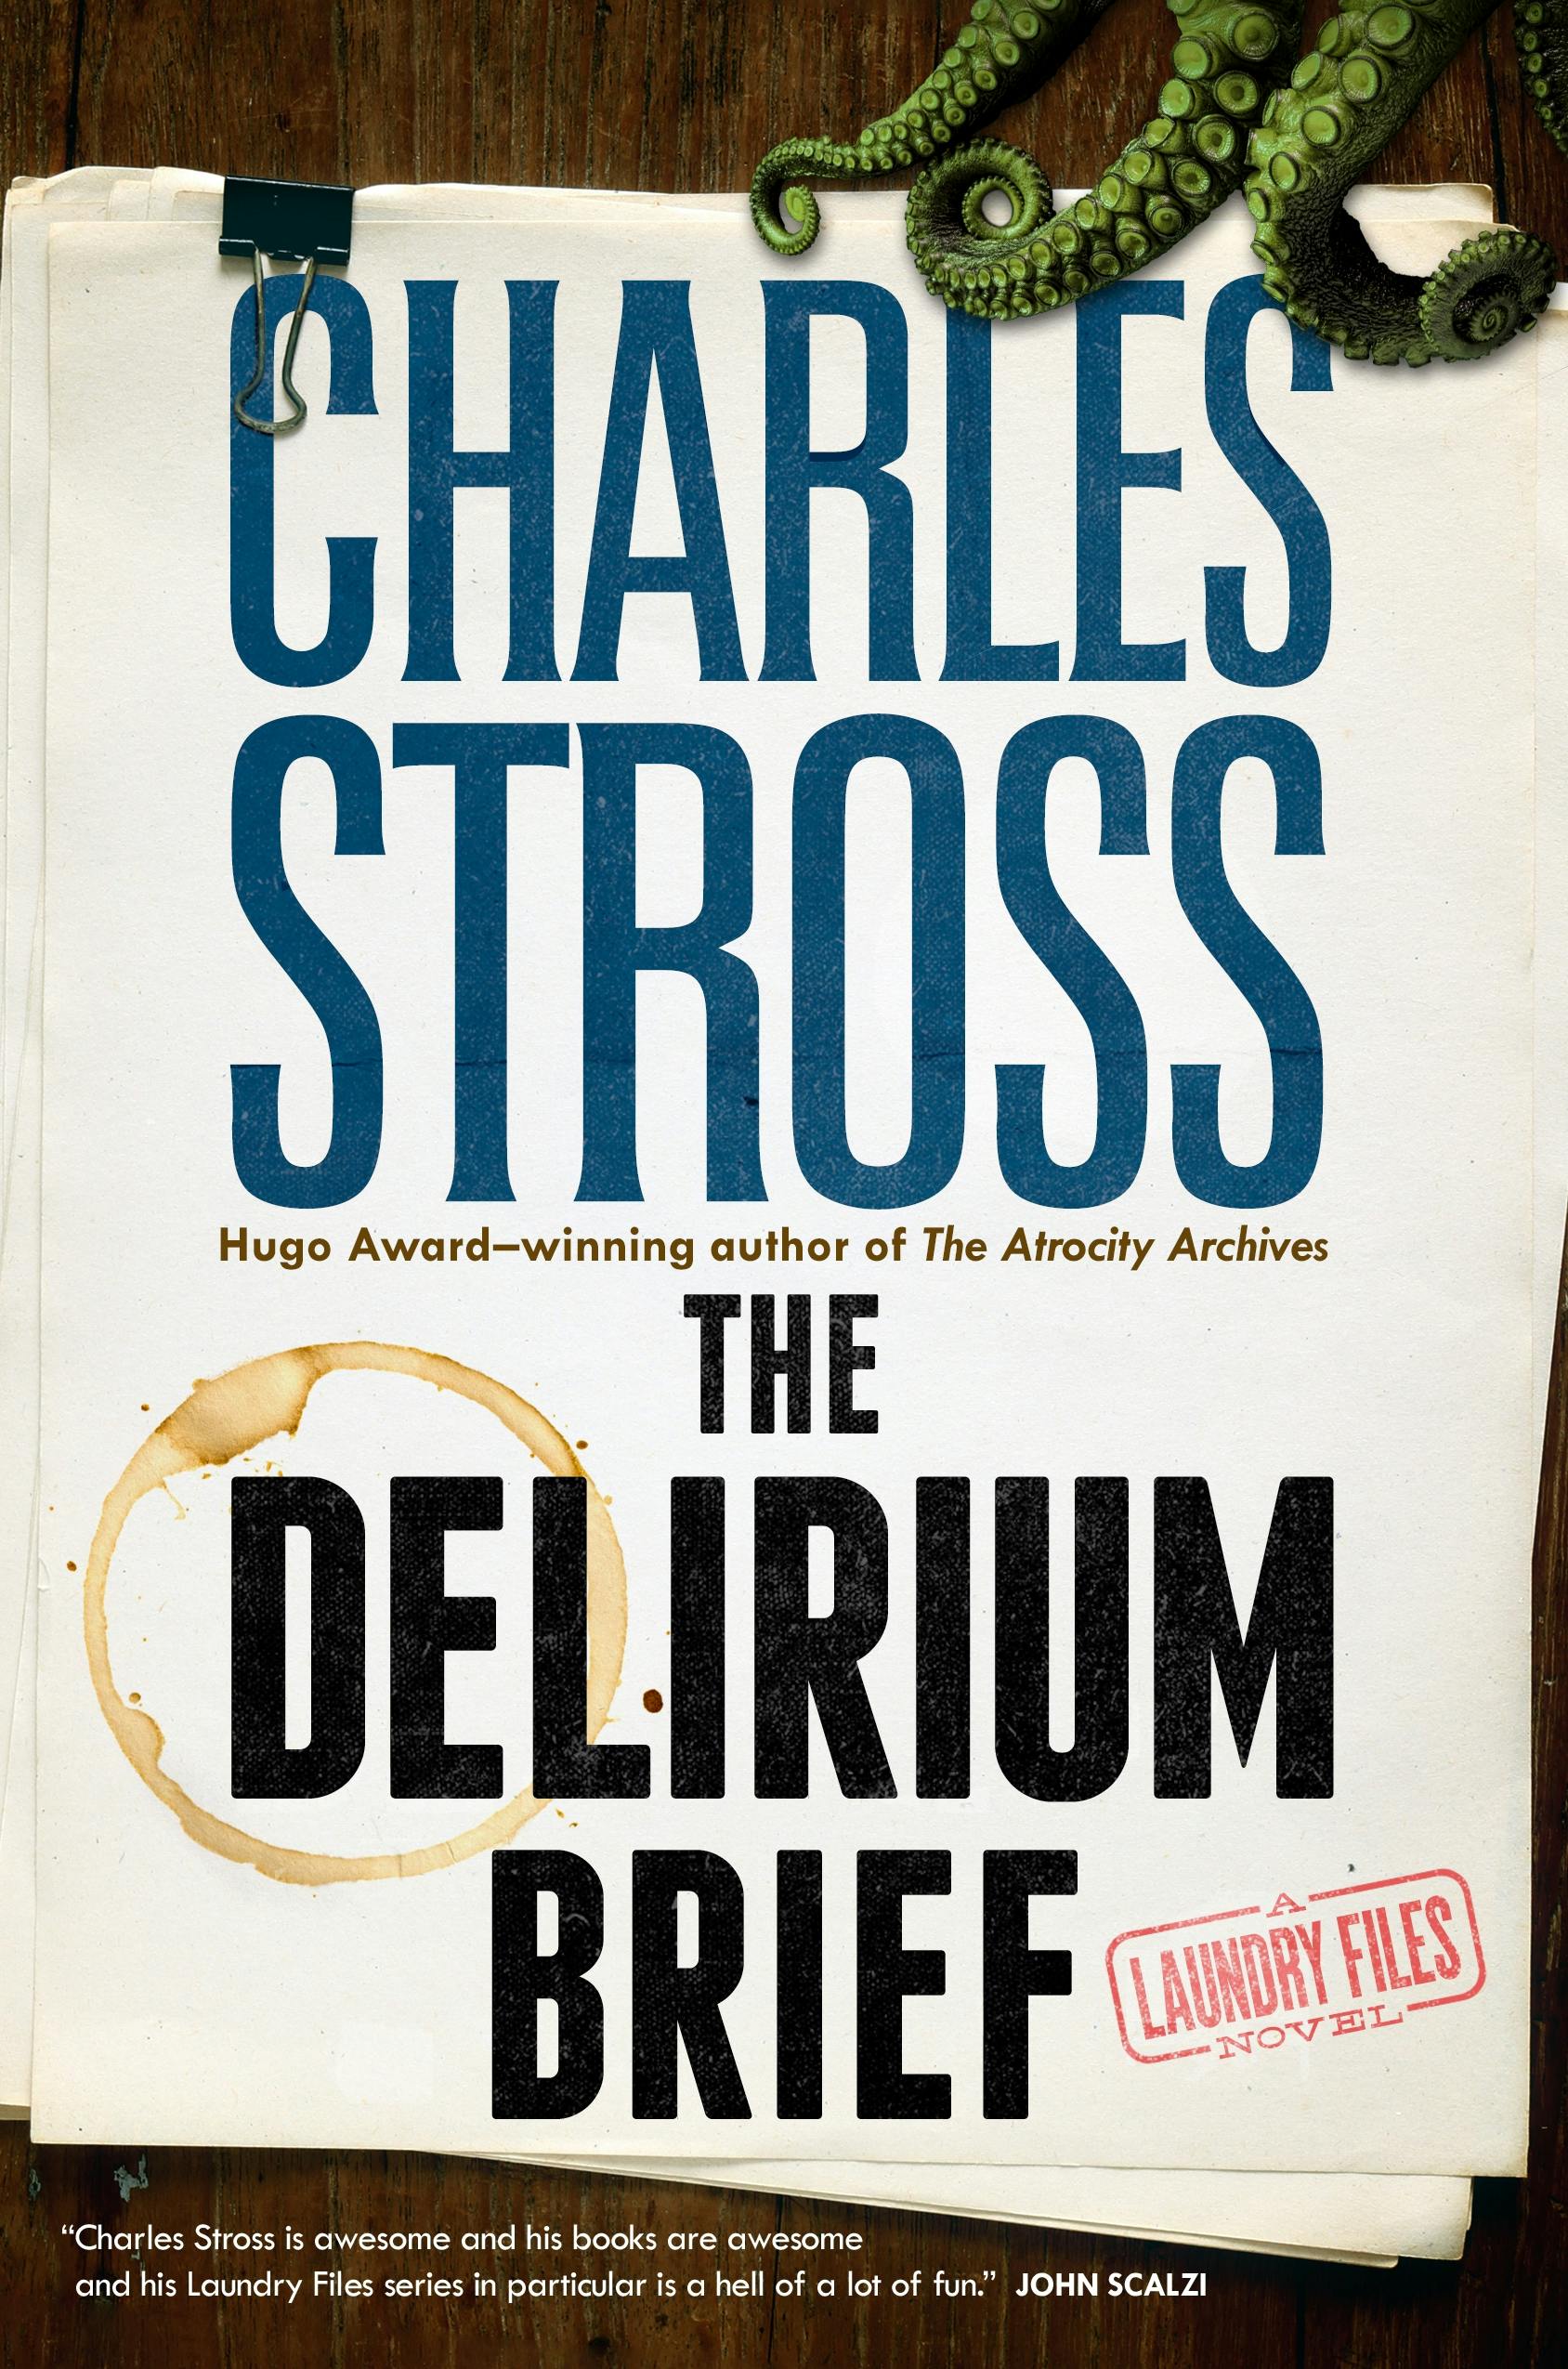 Cover for the book titled as: The Delirium Brief